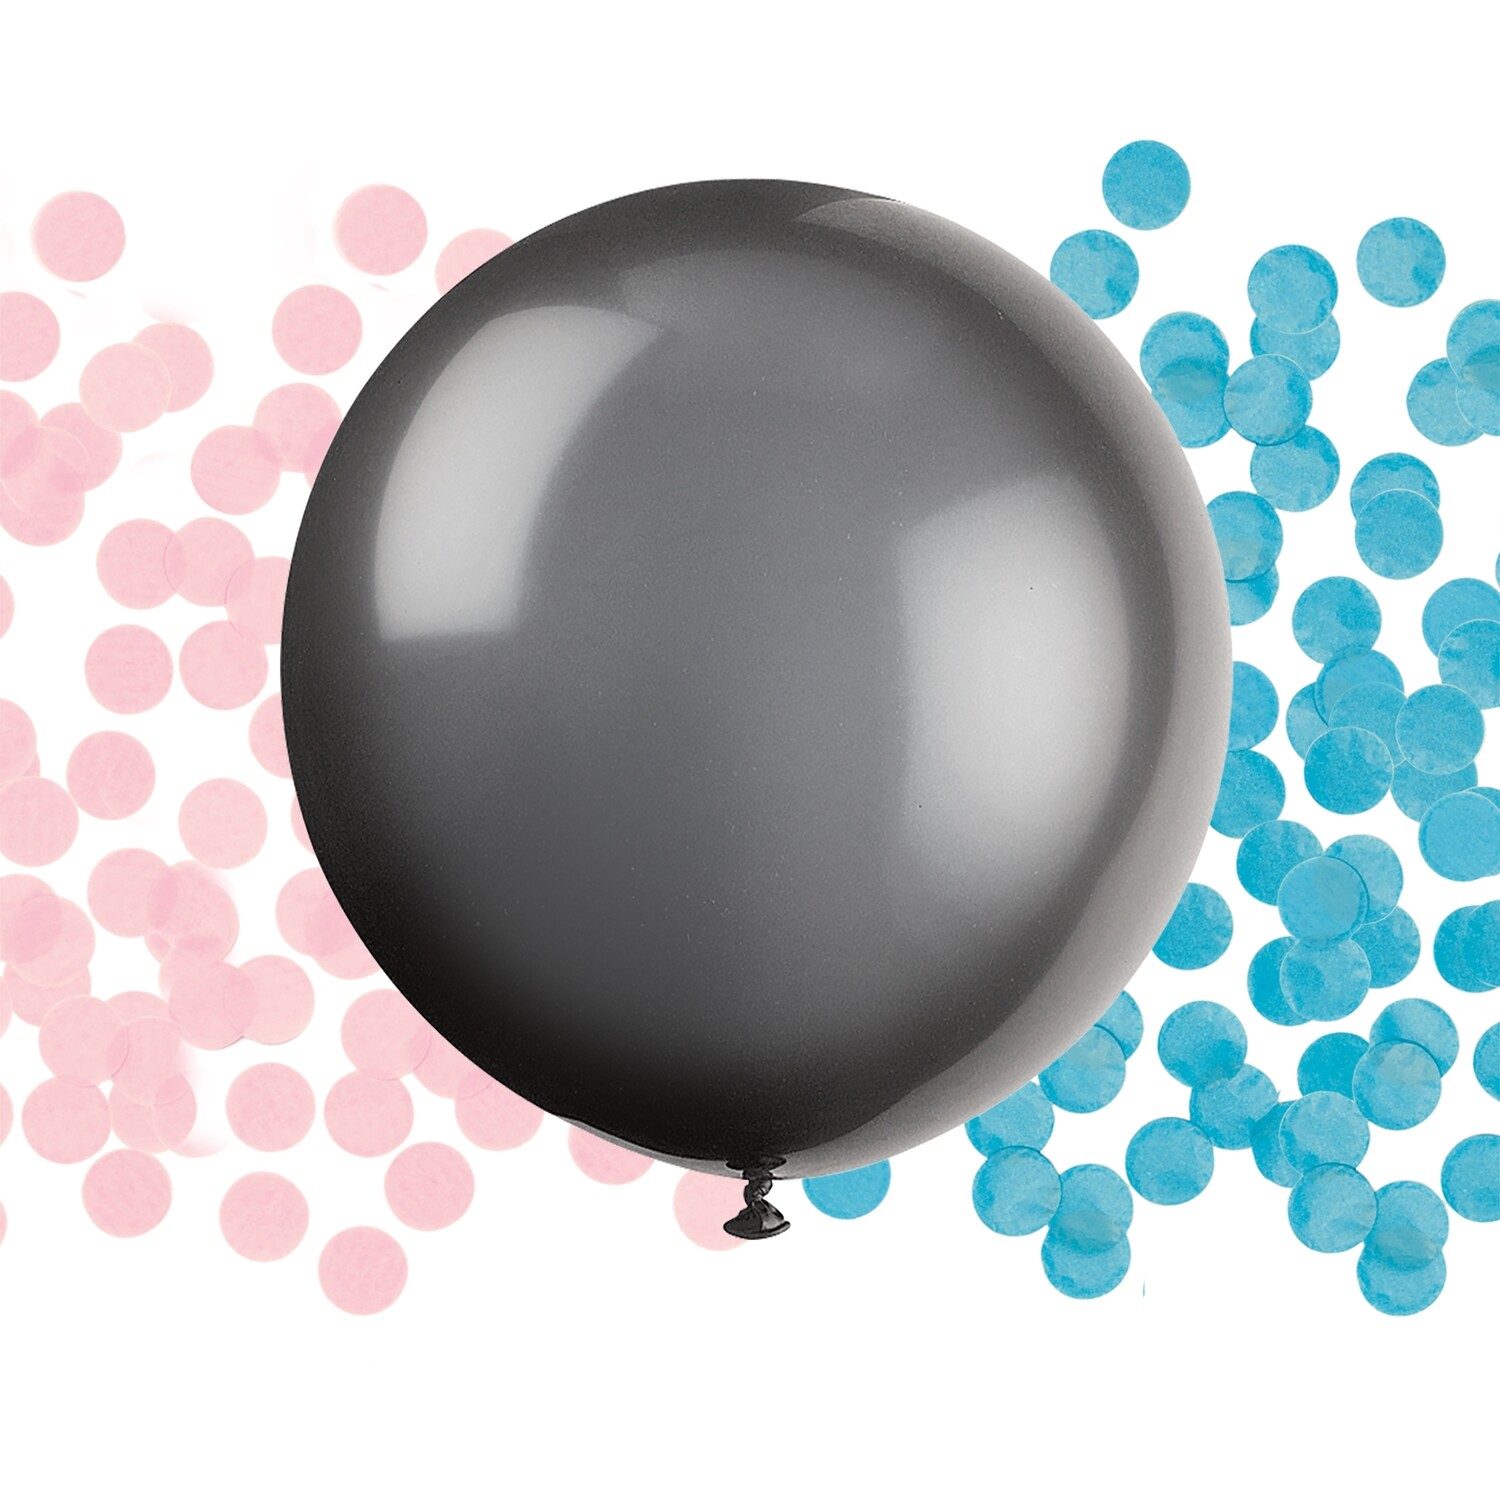 Black 24" Gender Reveal Balloon with Blue or Pink Confetti...you choose!